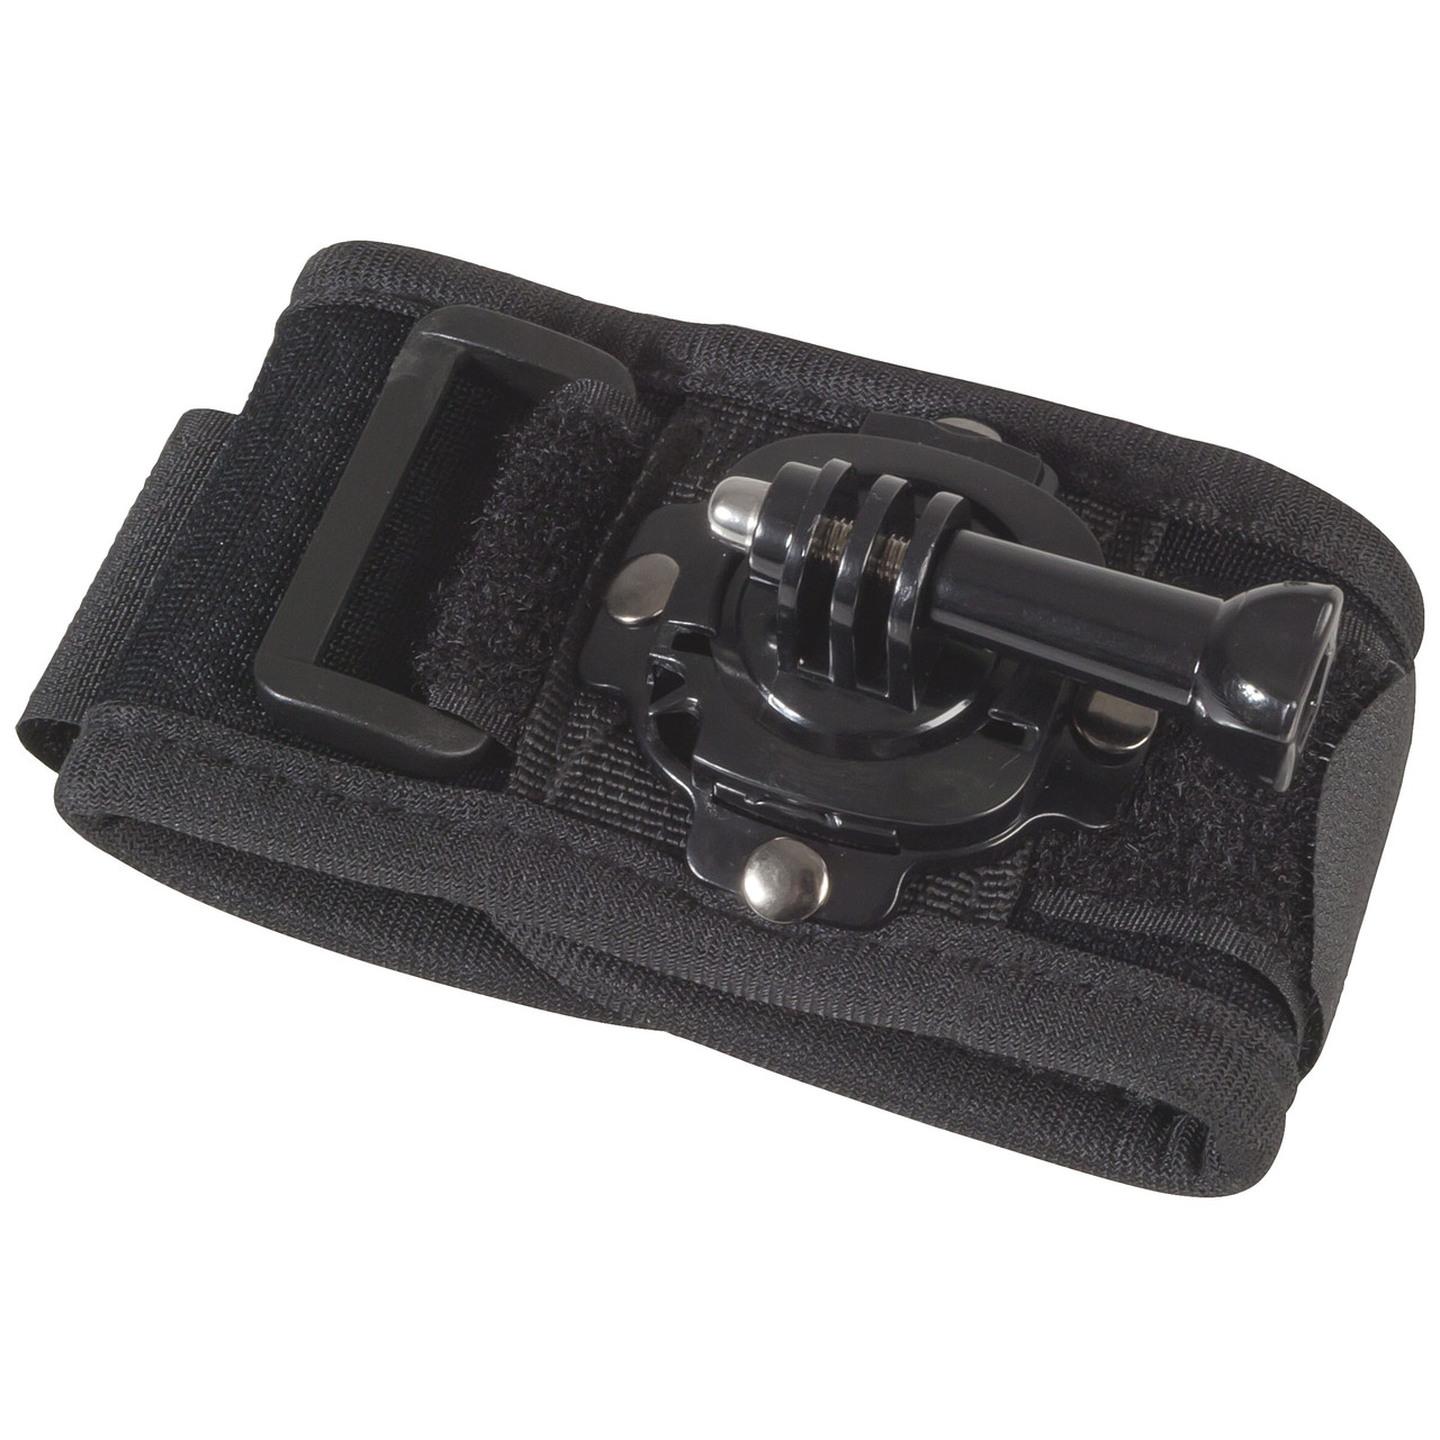 360 Wrist Mount for Action Cameras